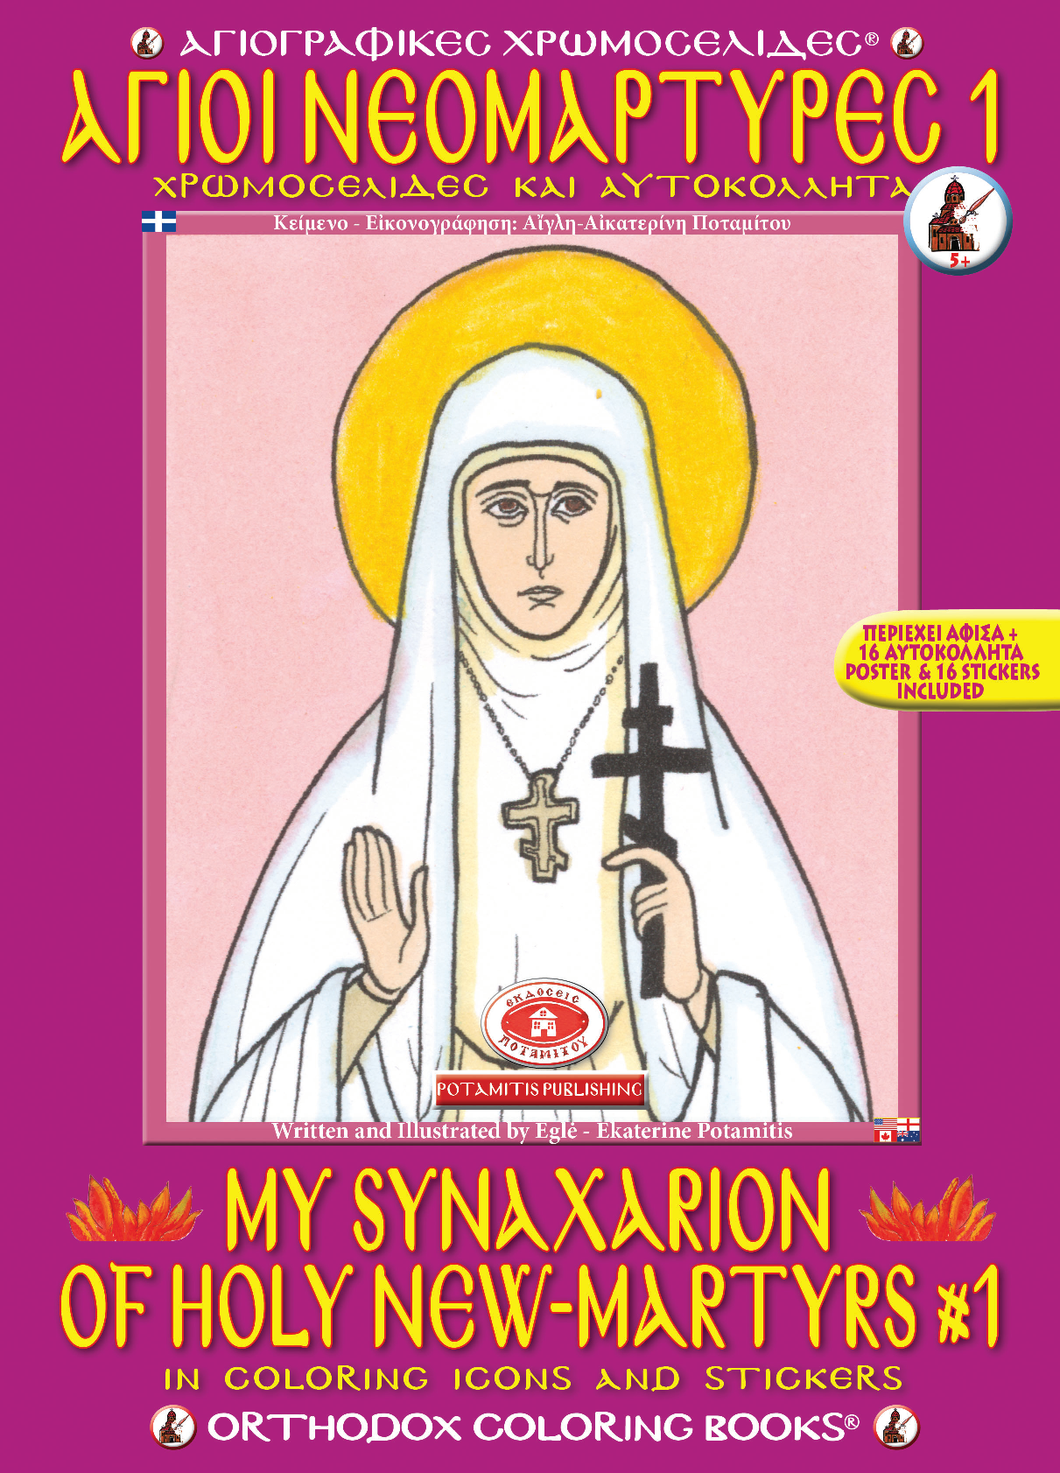 Orthodox Coloring Books #32 - My Synaxarion of Holy New Martyrs #1 - With poster and stickers